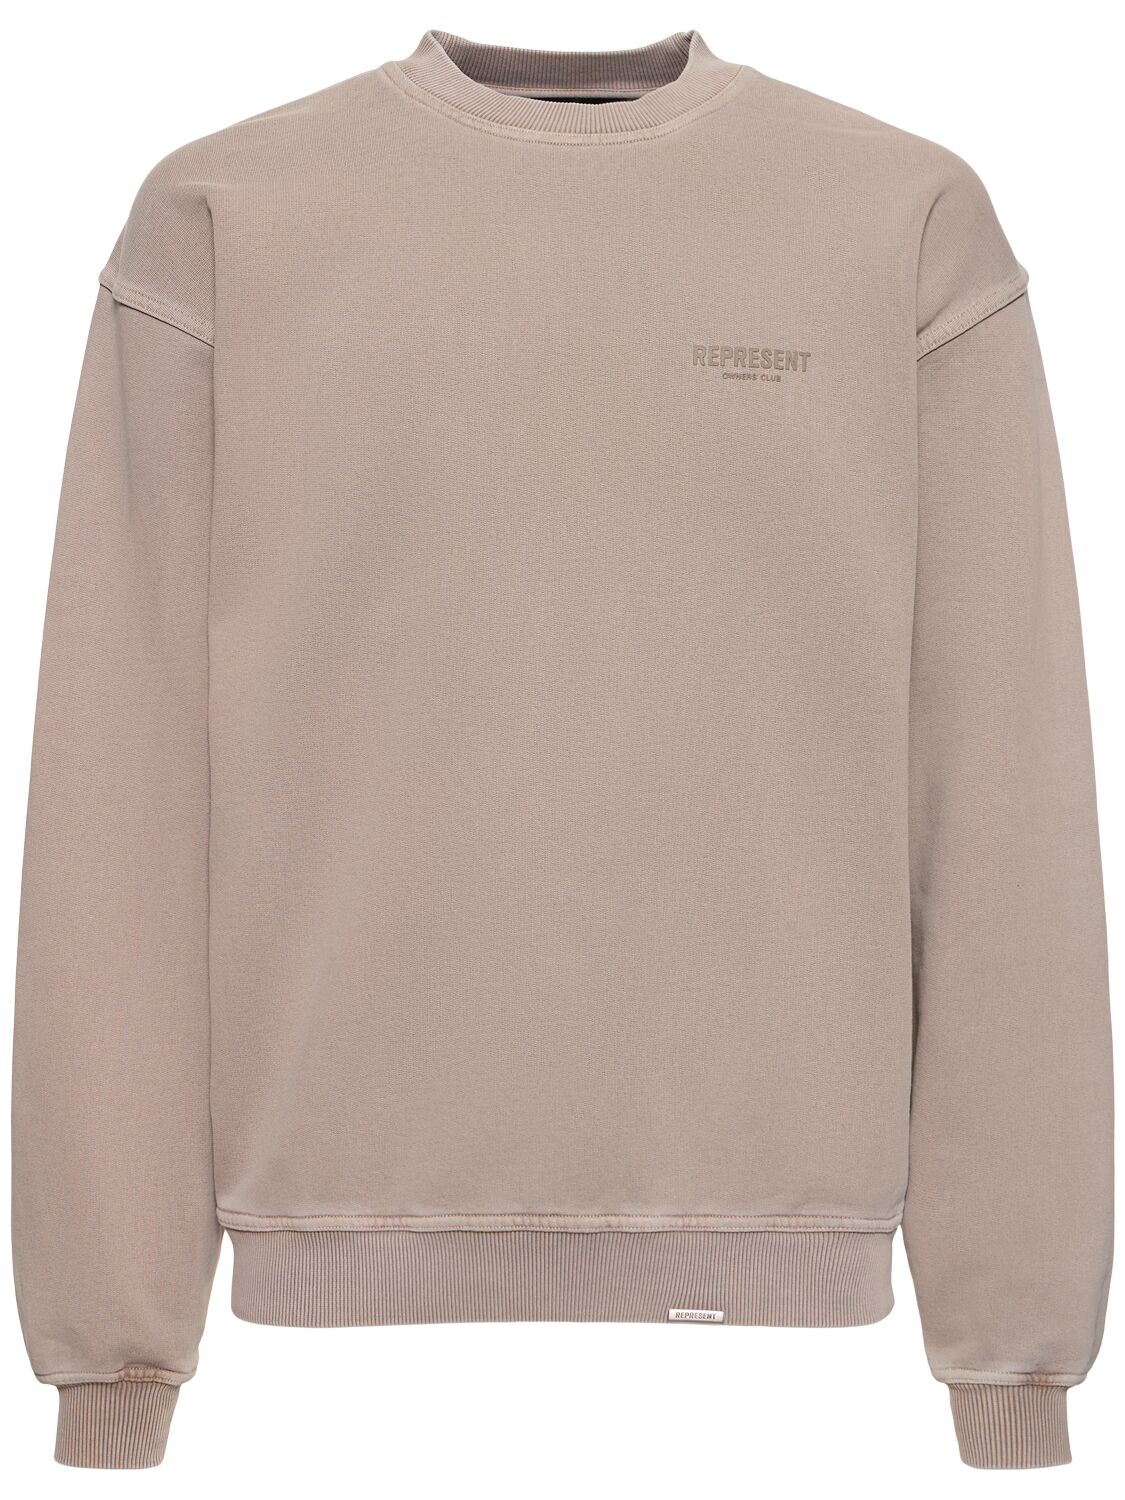 Represent Owners Club Oversize Cotton Sweatshirt In Neutral